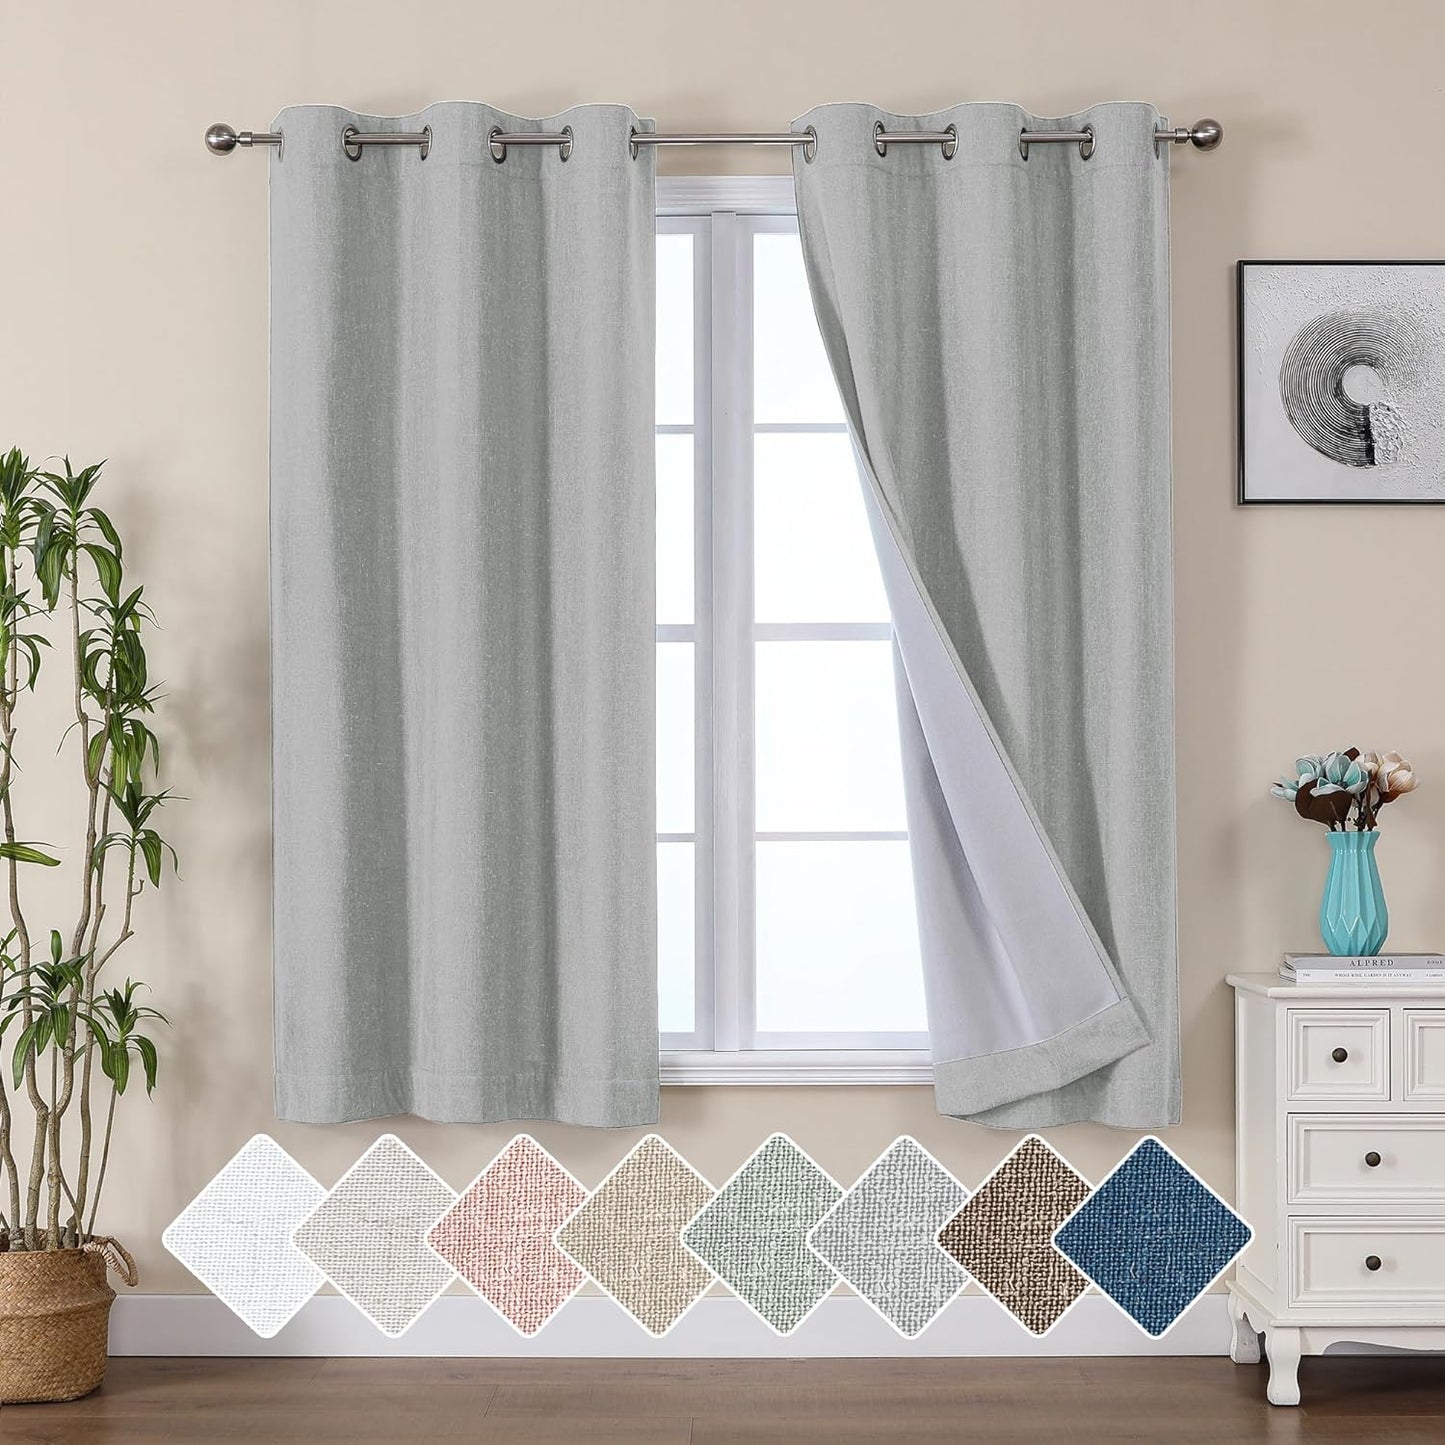 Jenny Ivory Beige Textured Linen 100% Blackout Curtains 63 Inch Length 2 Panels, Energy Saving Window Treatment Heavy Curtain Drapes for Bedroom/Living Room, Burlap Fabric Curtains, 38W  Simplebrand Grey 38"W X 54"L 